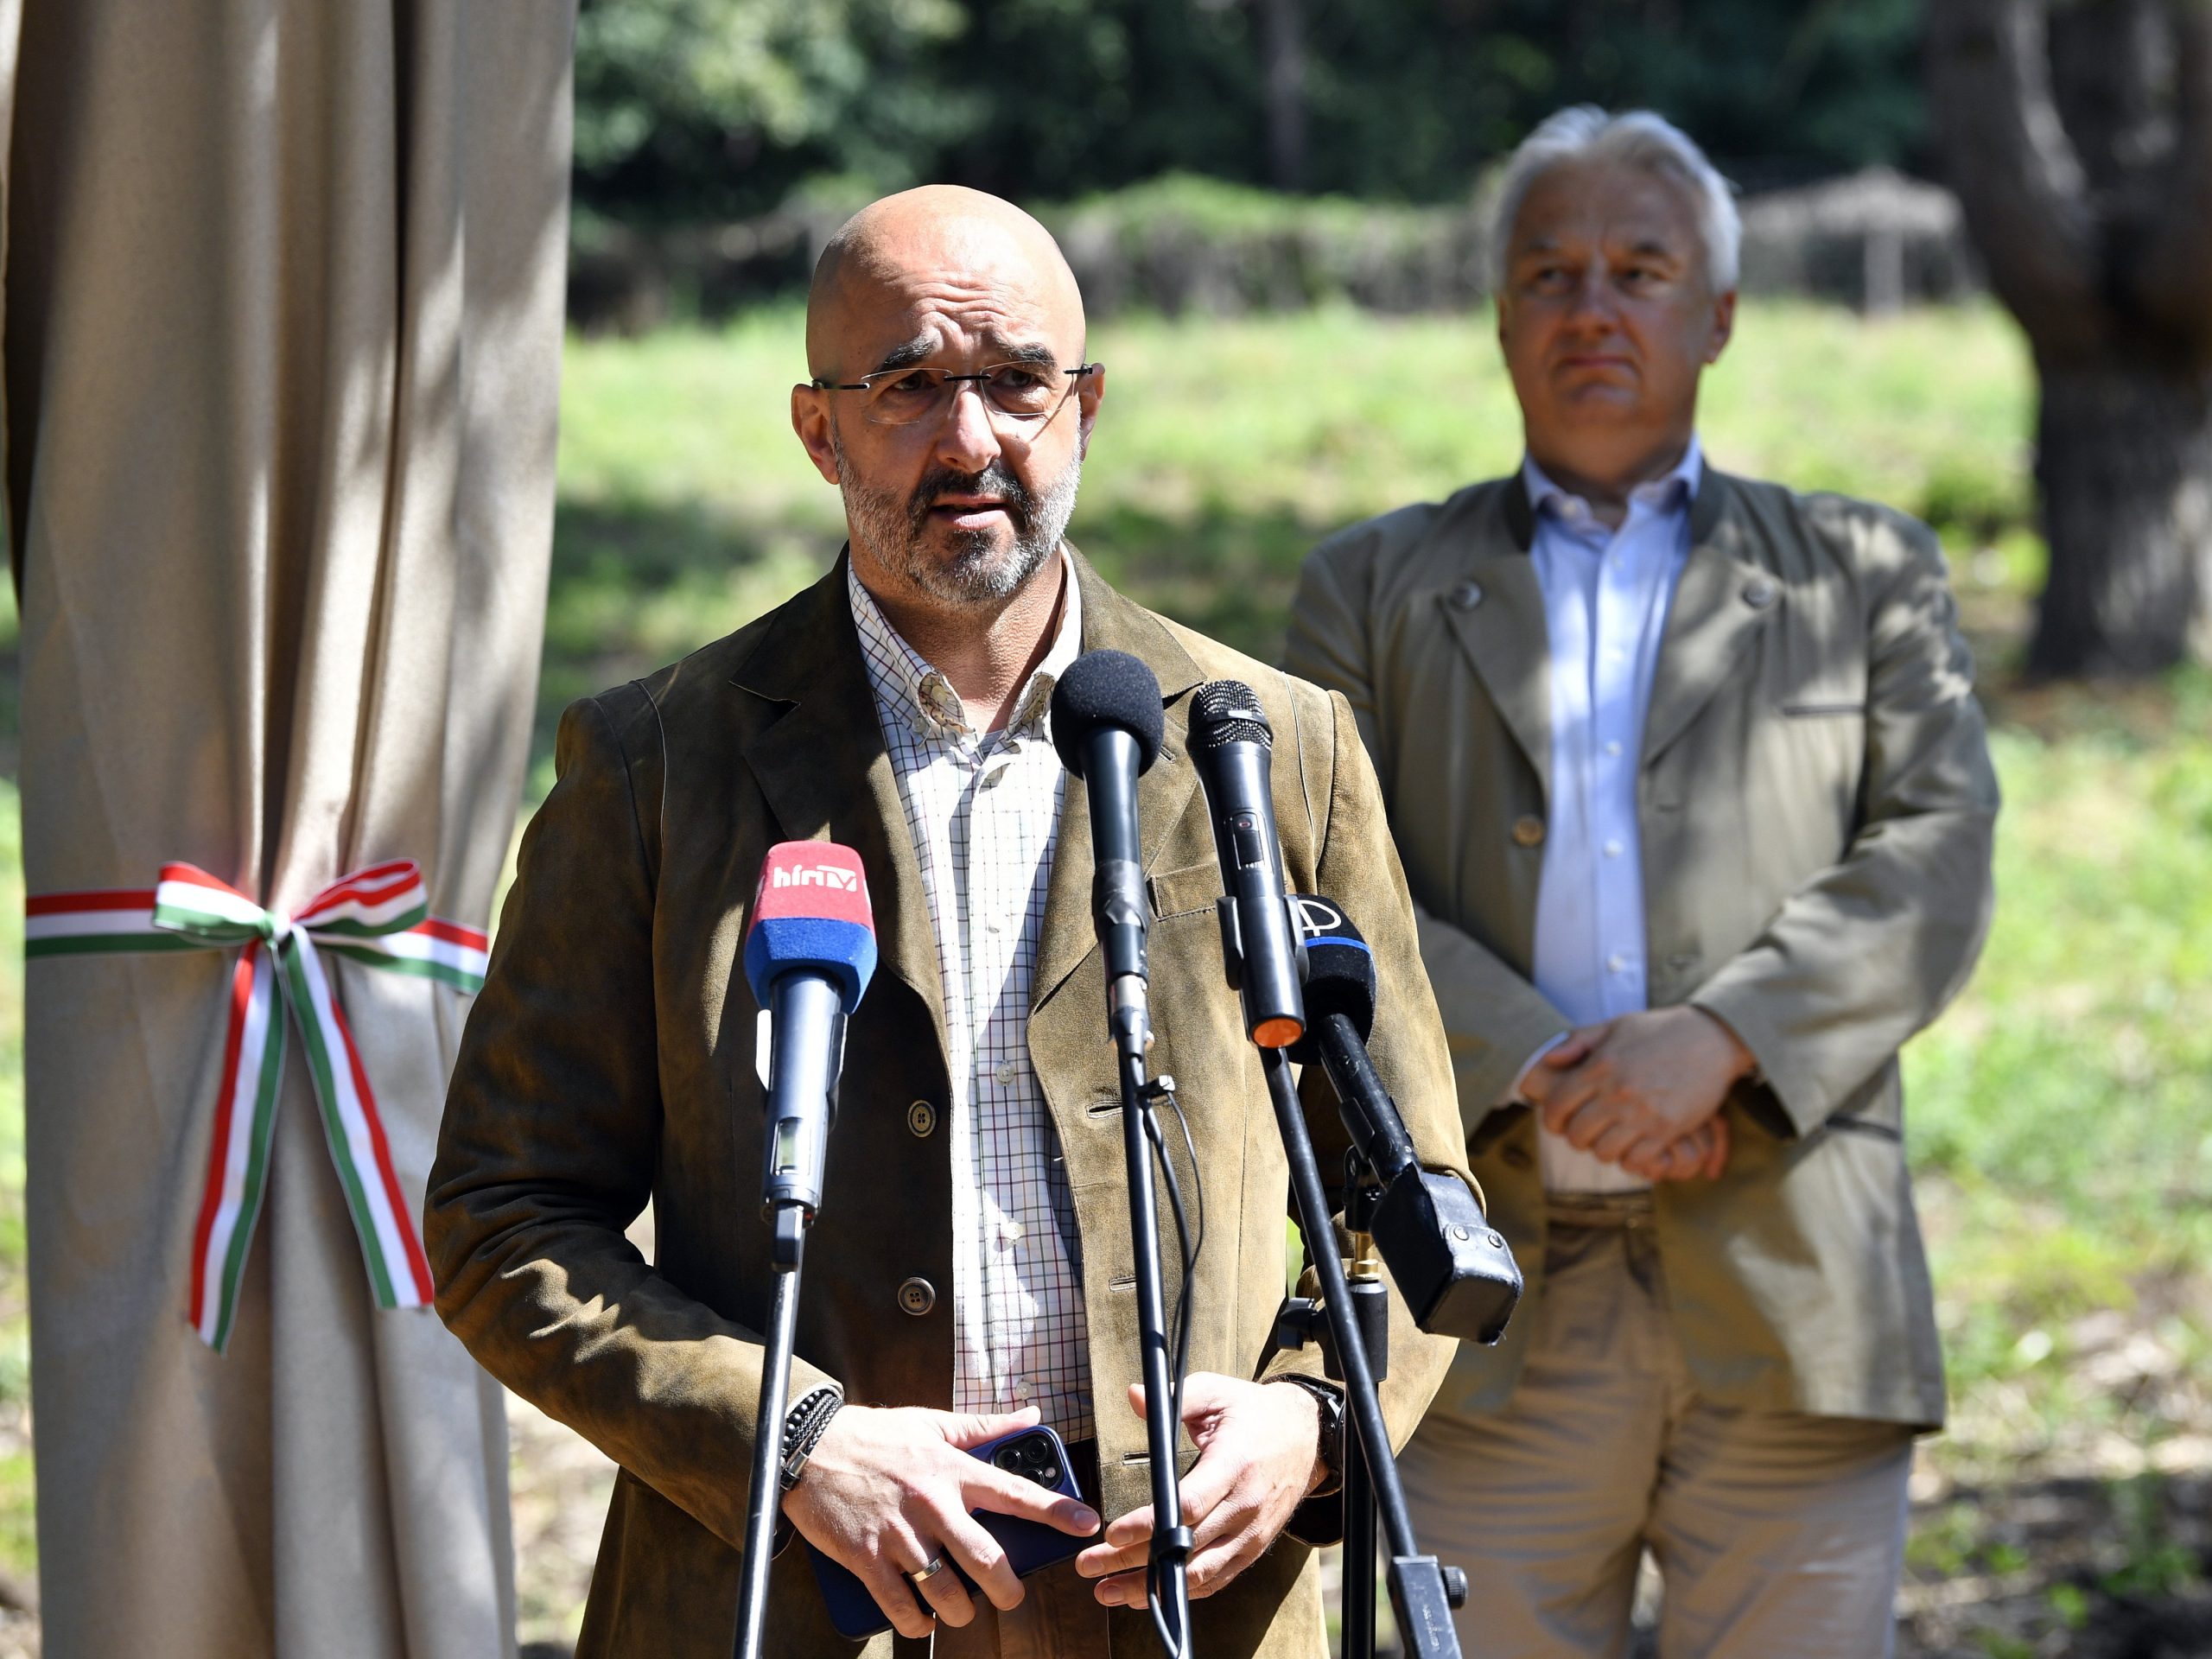 State Secy Kovács: Hunting Expo Hungary's 'Most Complex Event' to Date